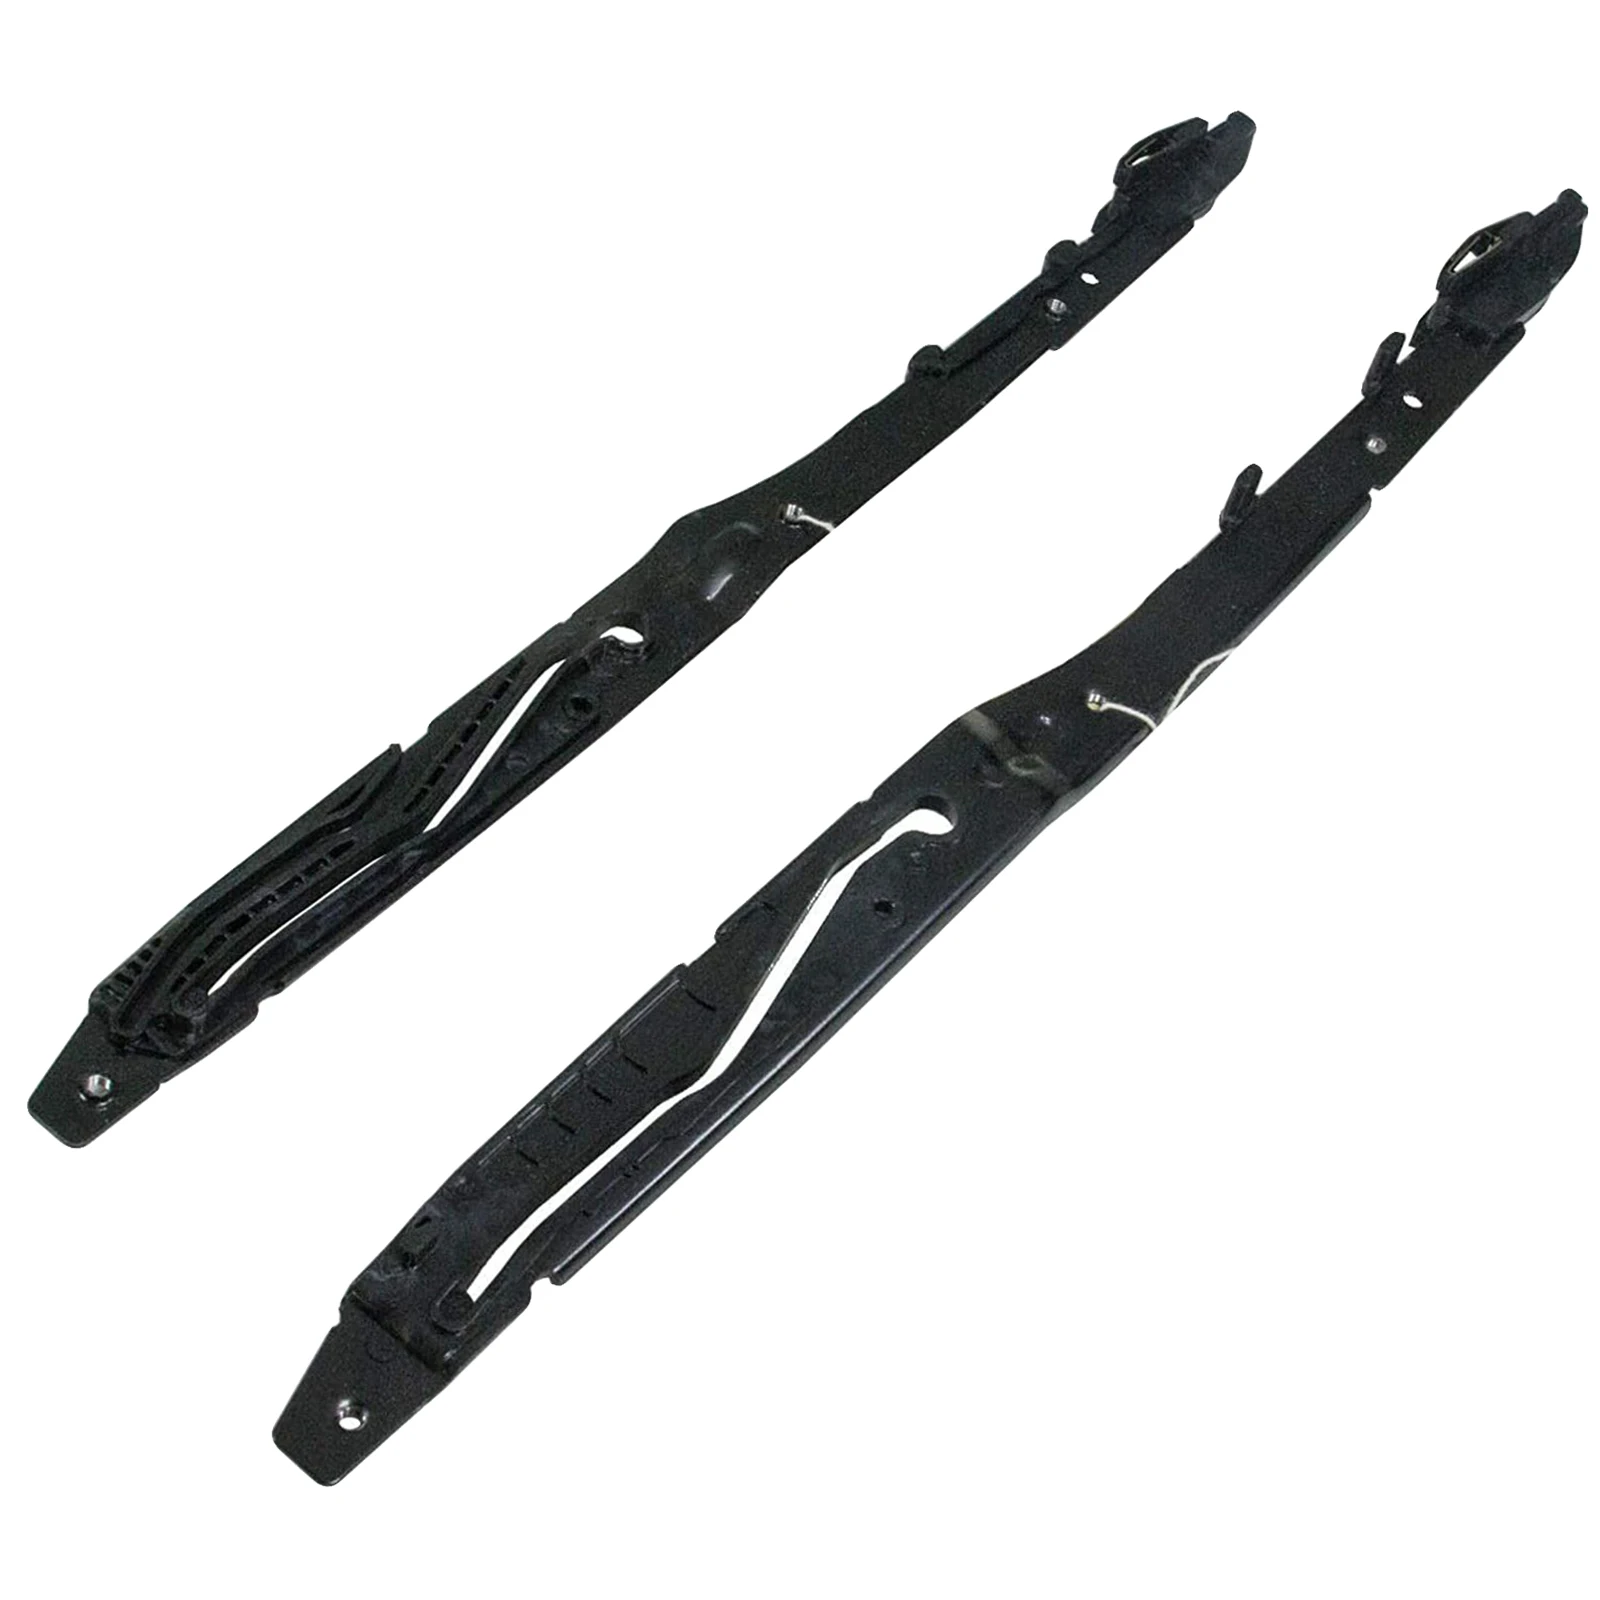 Vehicle 2Pcs Sunroof Track Assembly Repair Kit FL3Z-1651071-A for Ford F250 F350 F450 2017-2019, Durable Premium Material